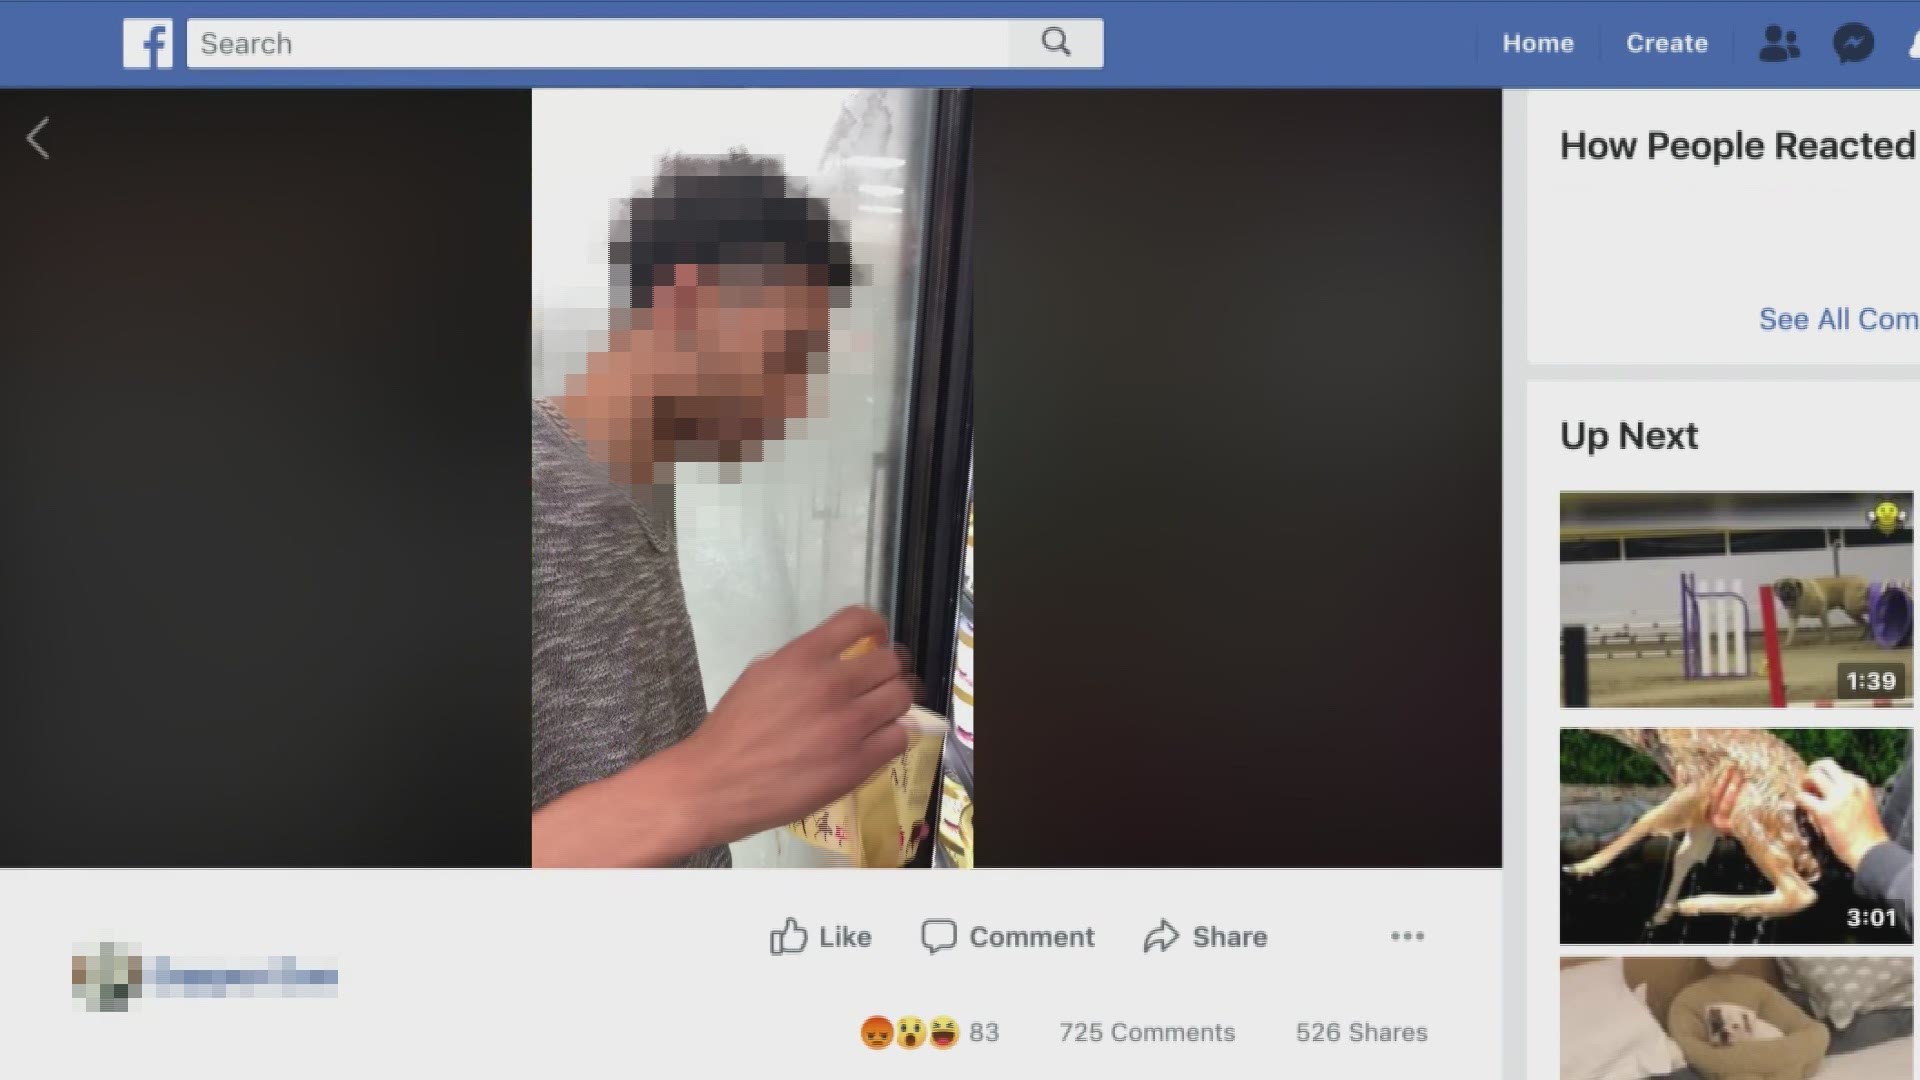 The video appears to show a man opening a freezer door and licking a Blue Bell carton.